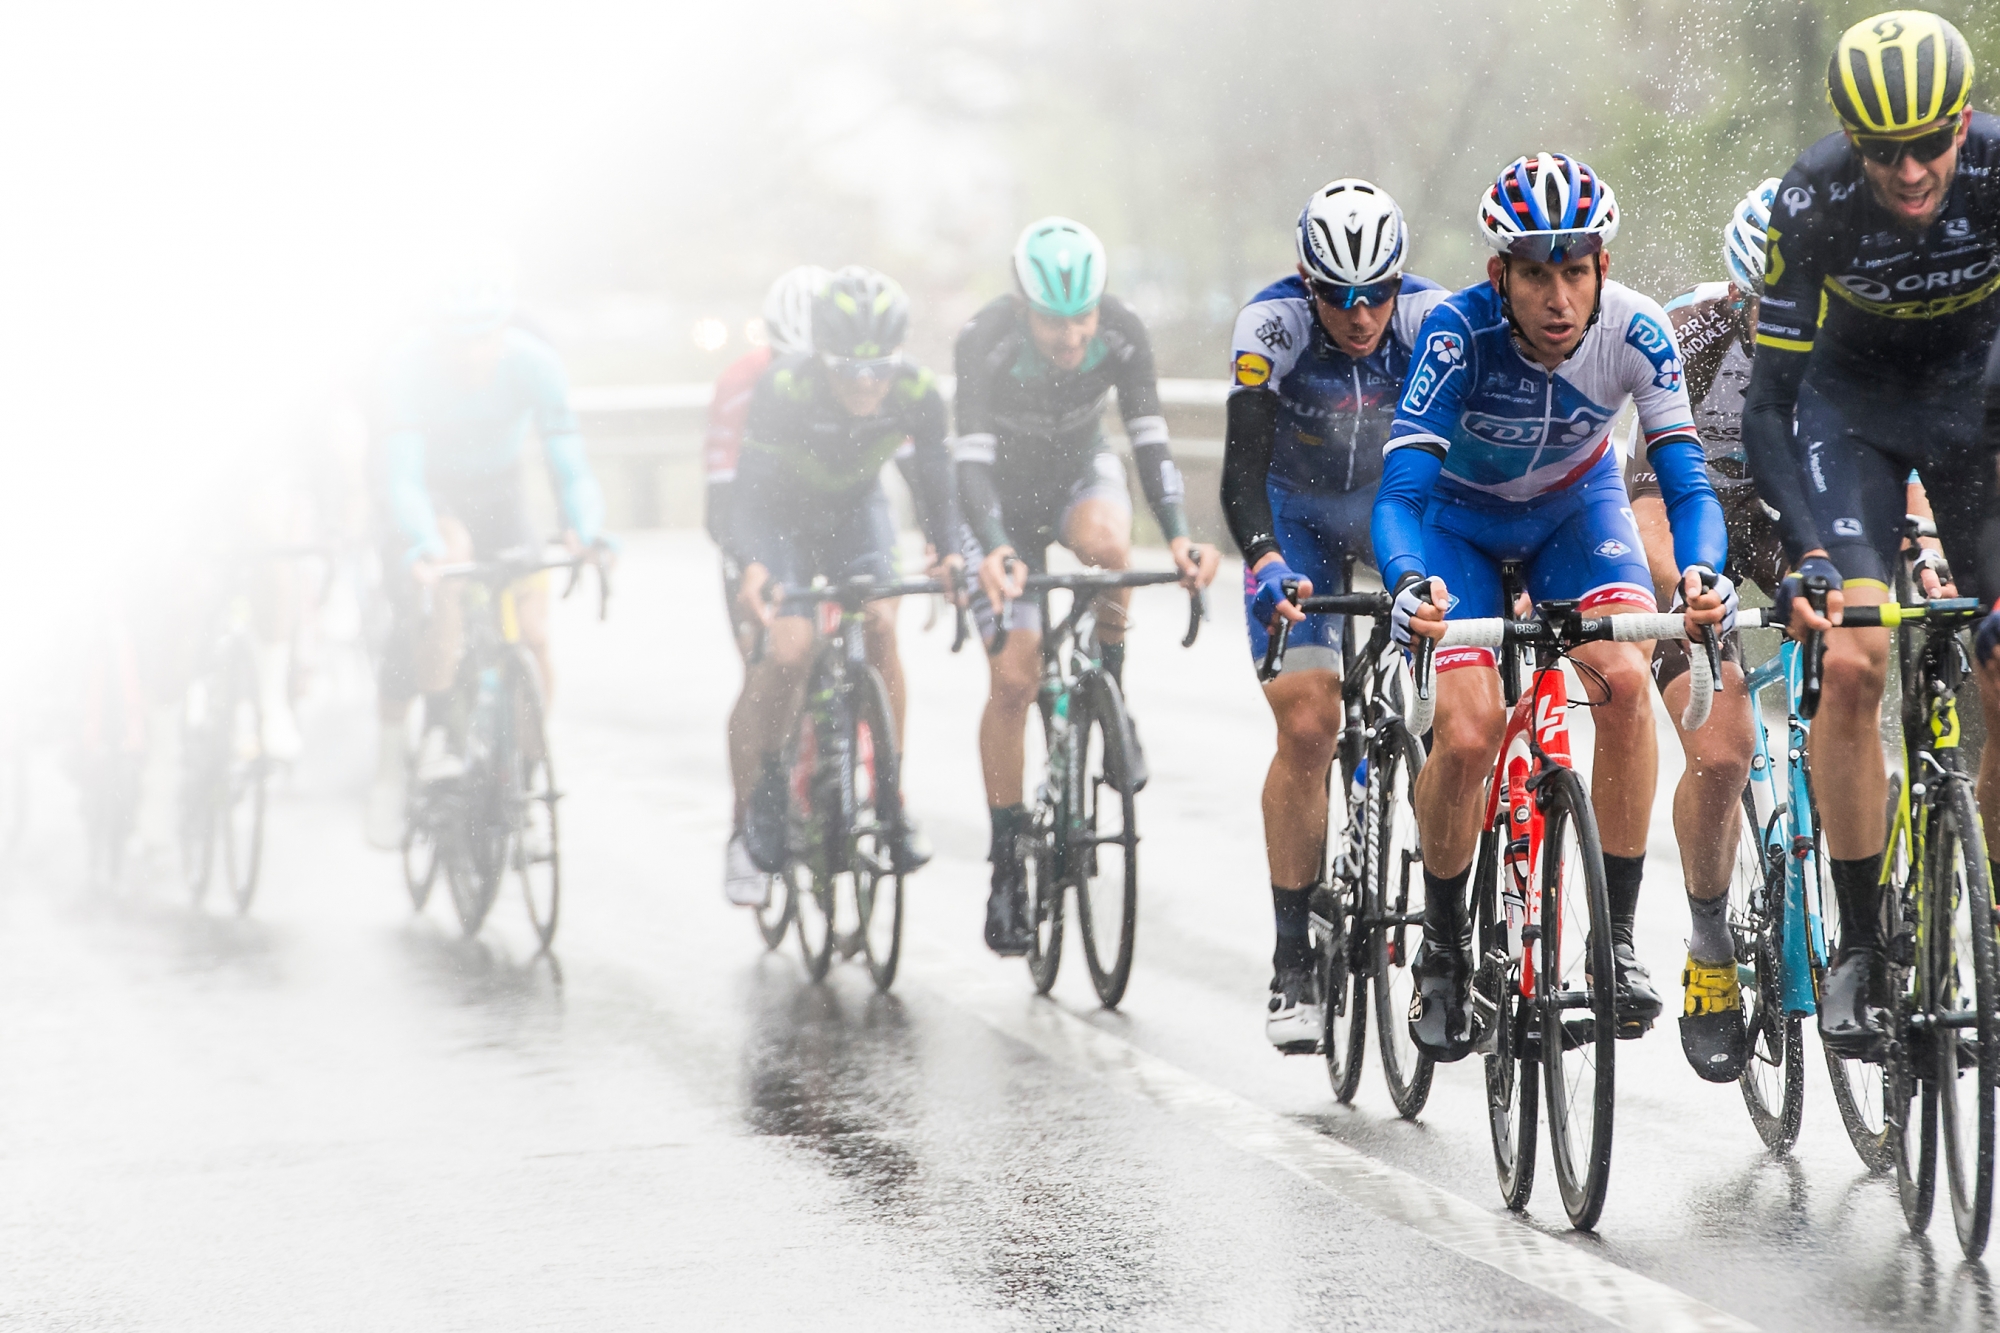 Sebastien Reichenbach from Switzerland of team FDJ, right, in action with the pack rides during the first stage, a 173.3 km race between Aigle and Champery at the 71th Tour de Romandie UCI ProTour cycling race in Troistorrents, Switzerland, Wednesday, April 26, 2017. (KEYSTONE/Jean-Christophe Bott) SWITZERLAND CYCLING TOUR DE ROMANDIE